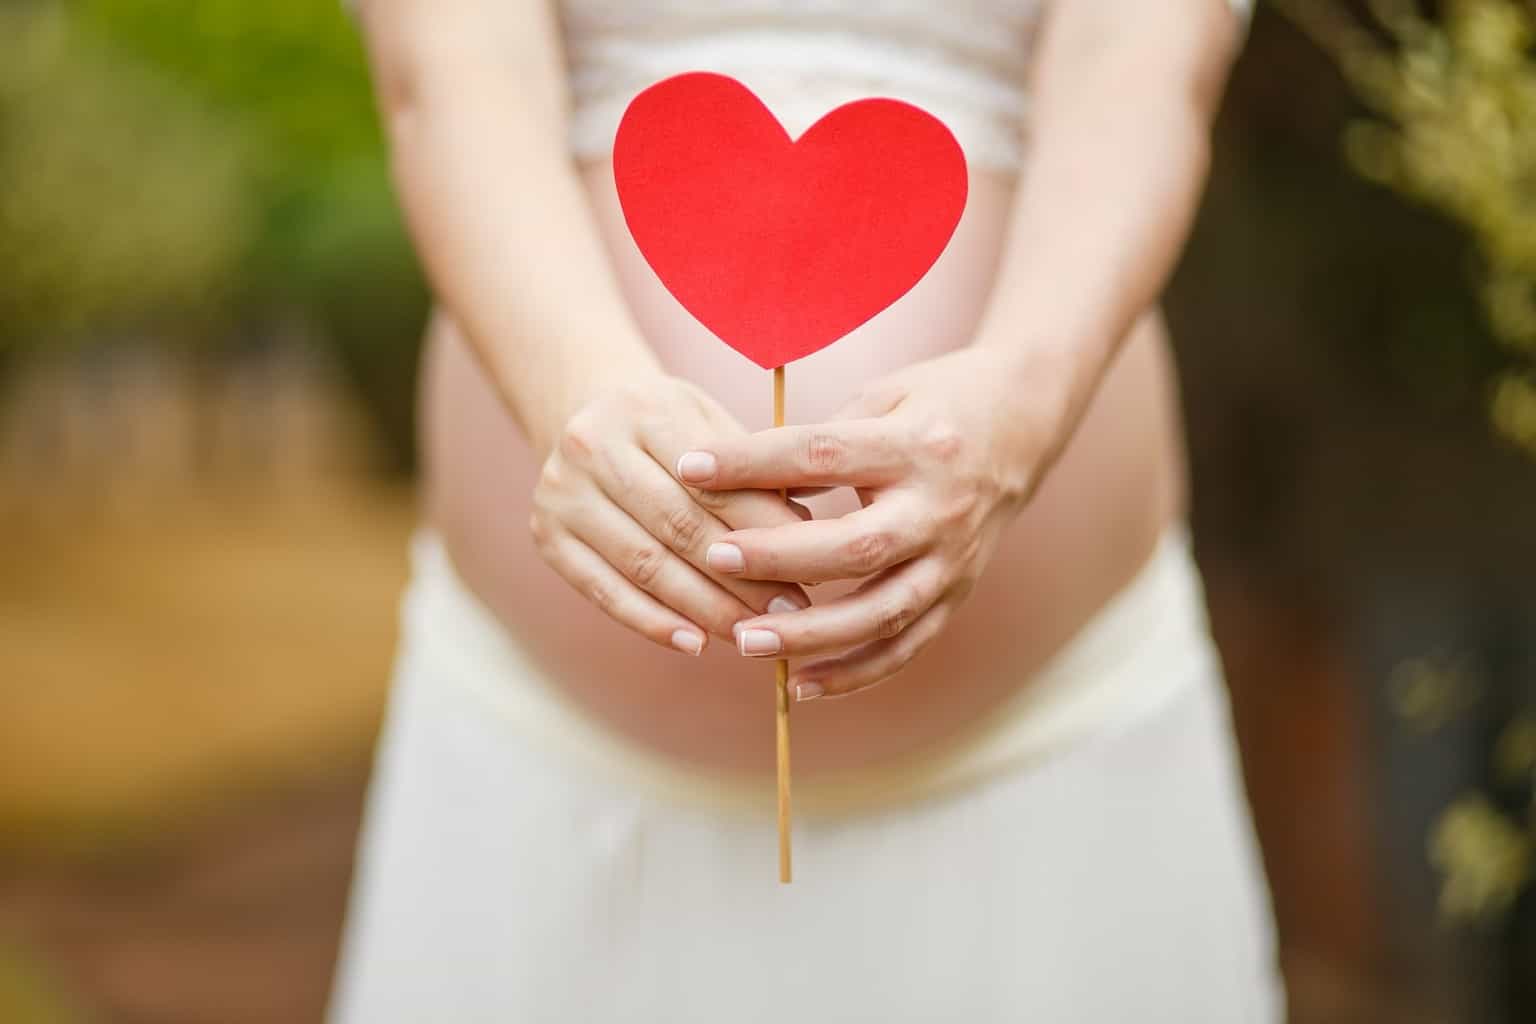 Going Through Pregnancy With A Heart Condition